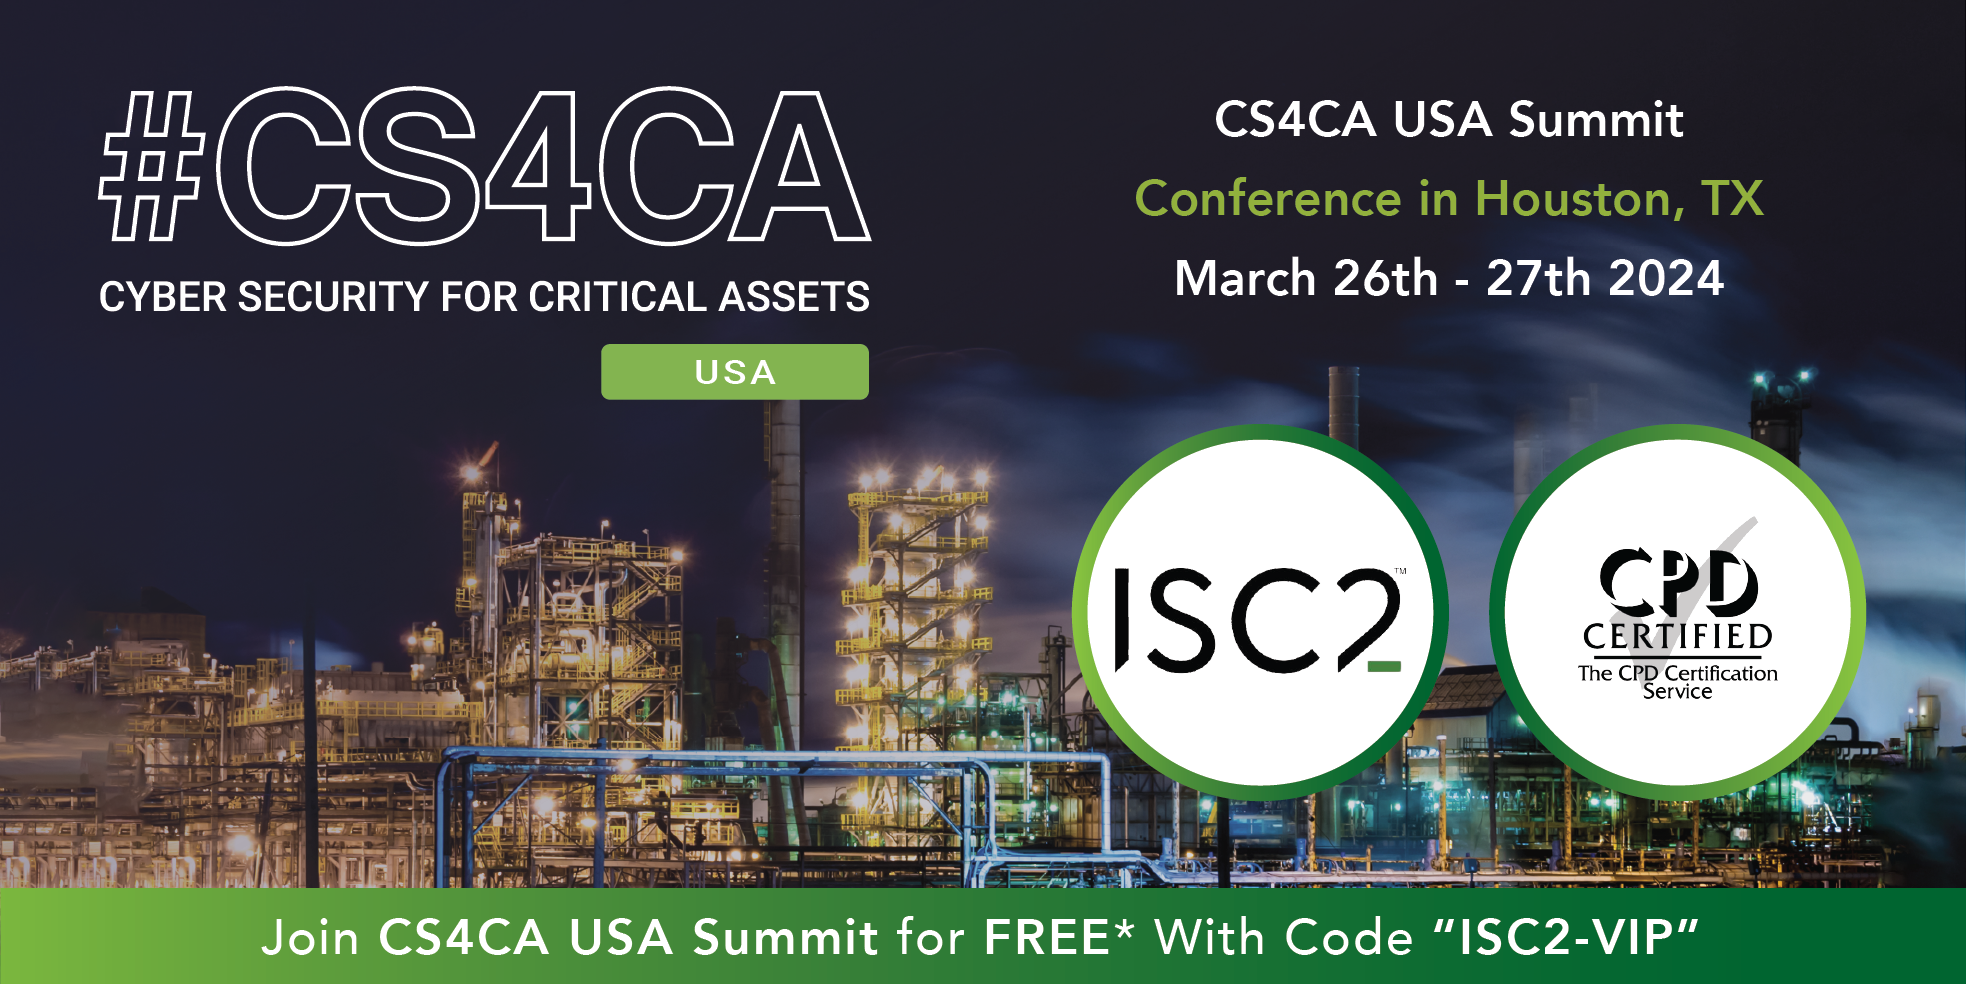 Cyber Security for Critical Assets USA (CS4CA)